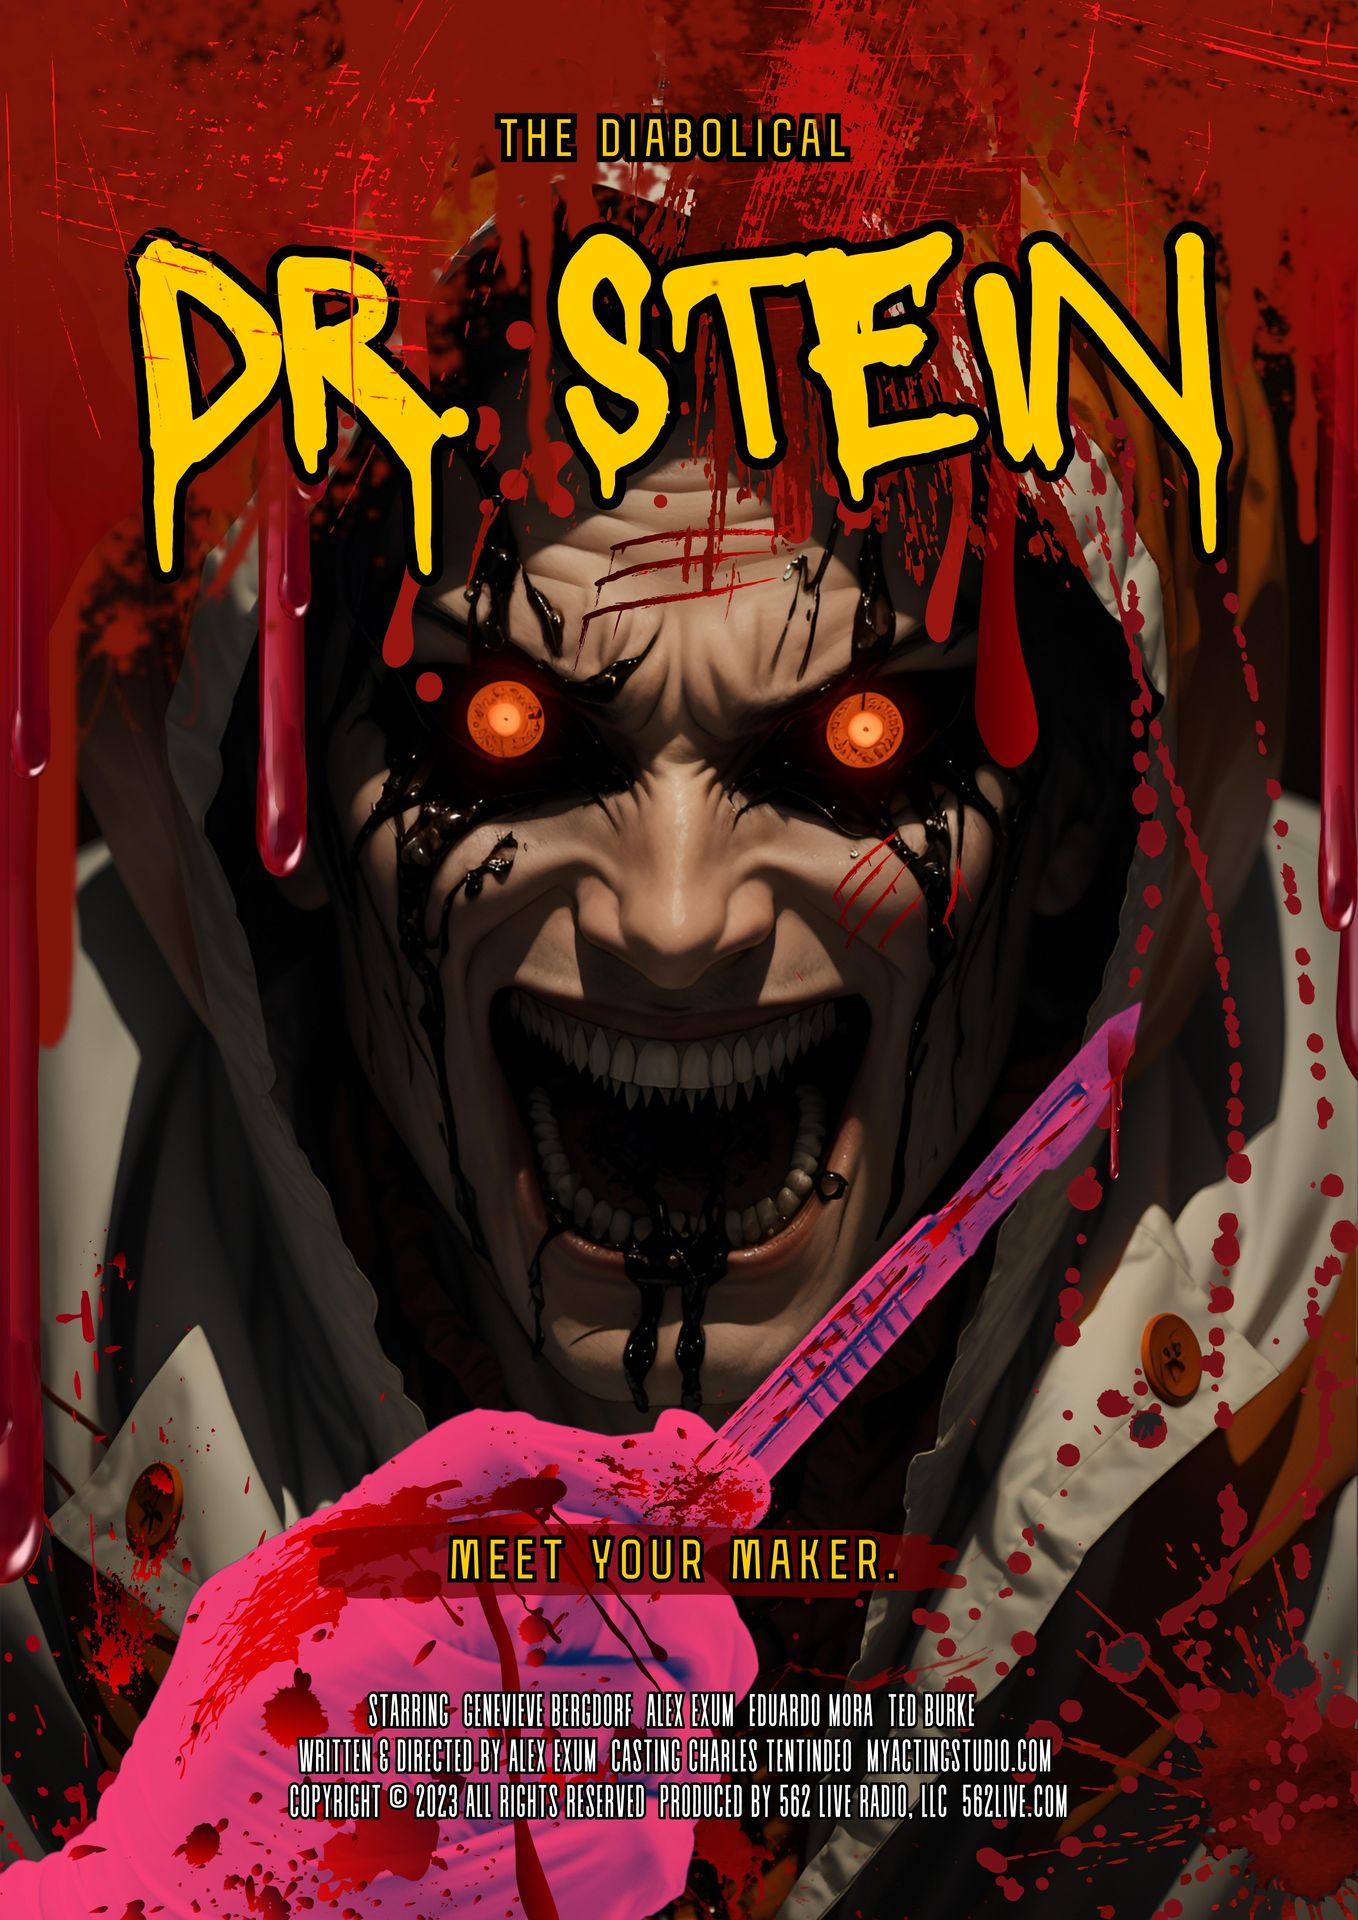 The Diabolical Dr. Stein poster